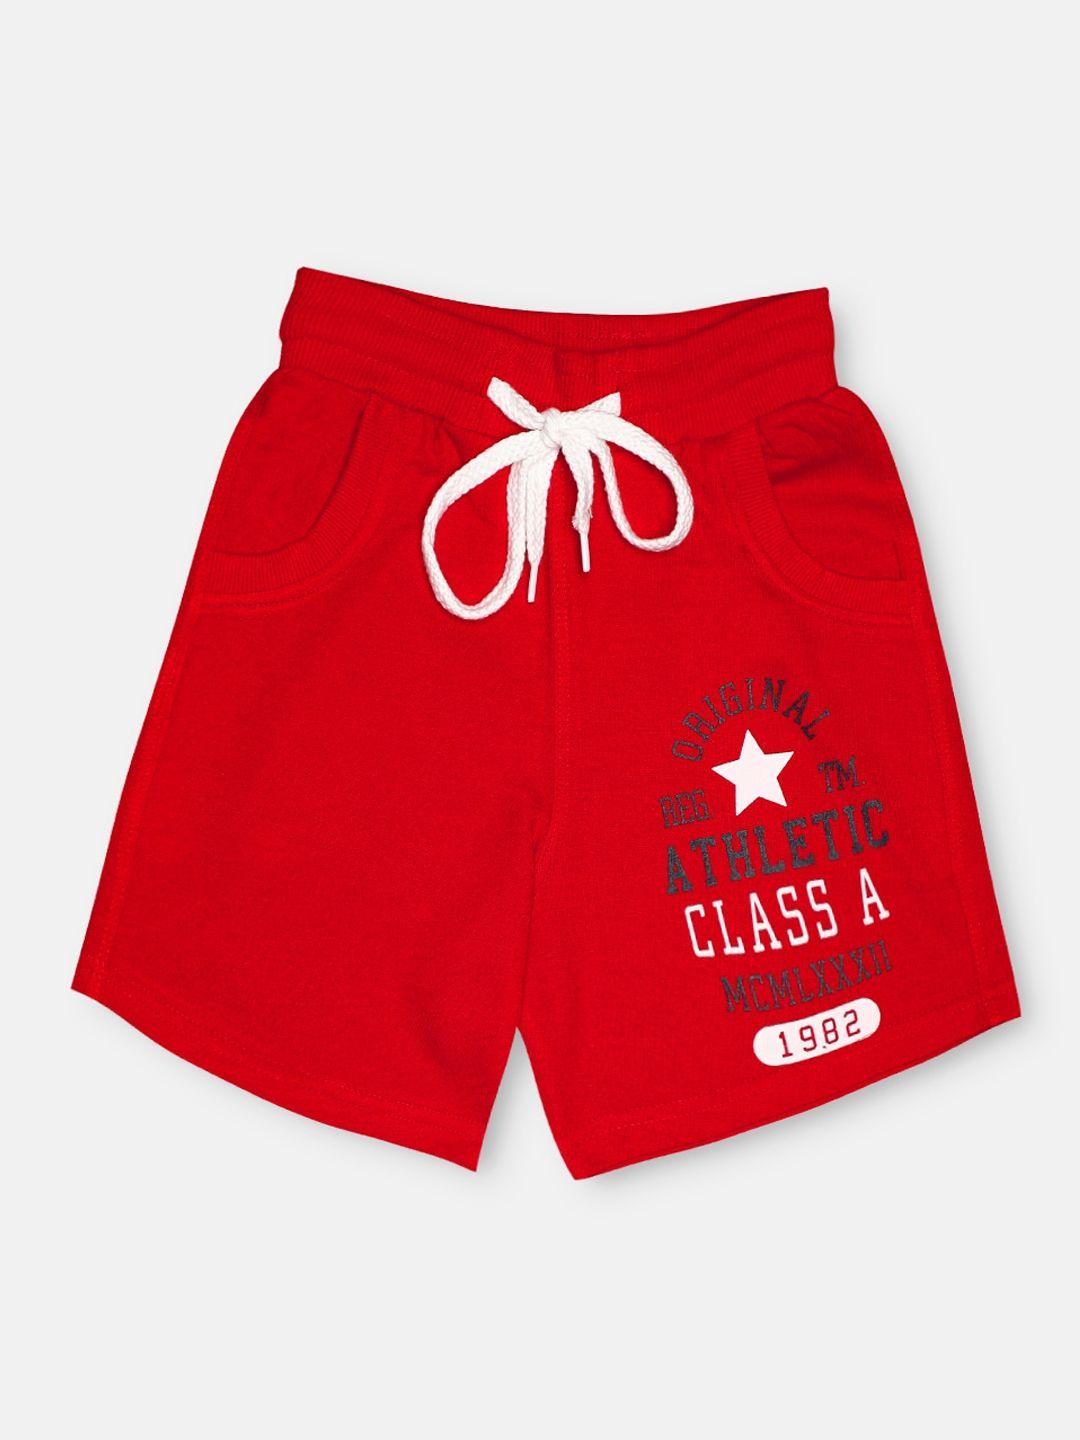 chimprala kids red & blue printed pure cotton antimicrobial shorts